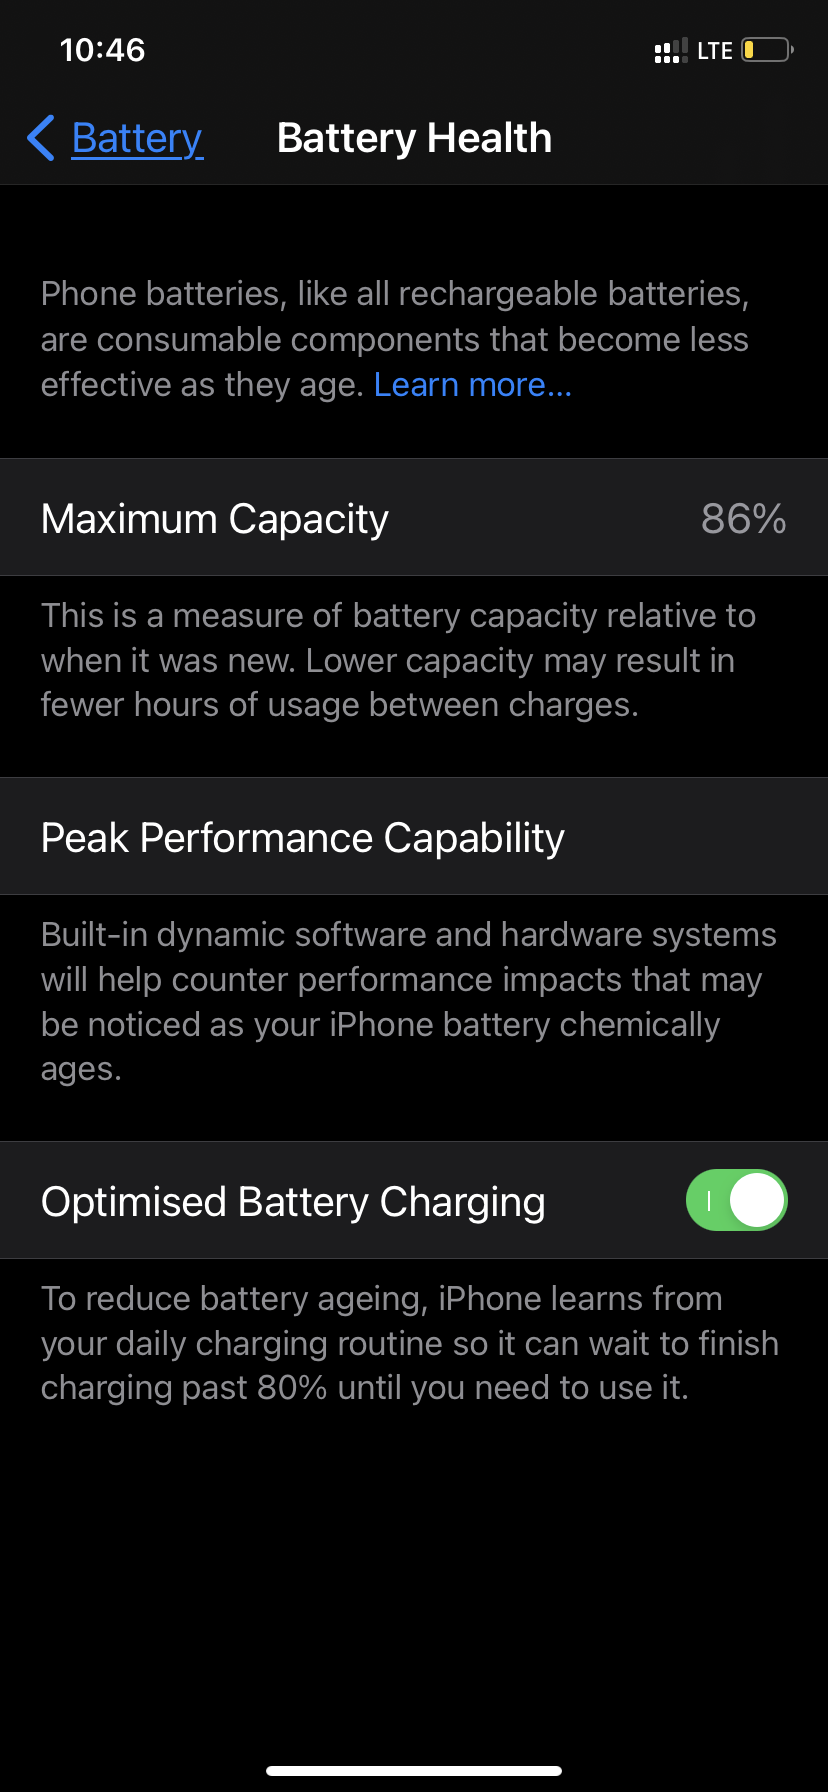 Is 86% battery health good for iPhone 11?